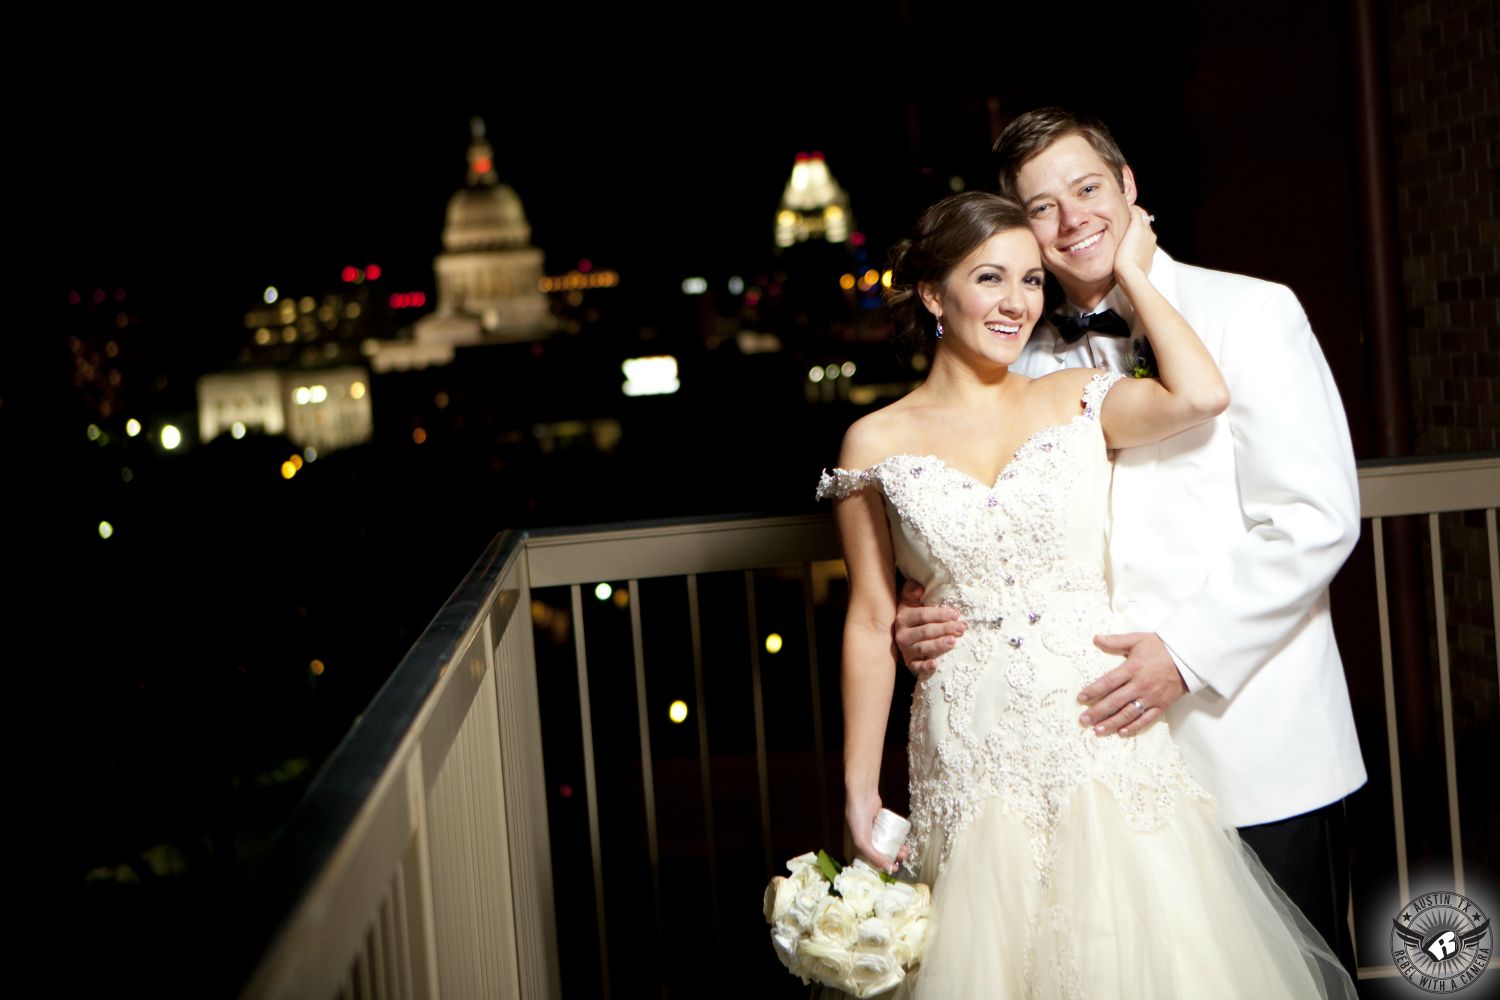 Wedding picture of the bride with white David Kurio bridal bouquet and groom on the balcony of theAT&T Executive Education and Conference Center on the UT on the UT campus at night with a view of the Texas State Capitol building taken by Austin wedding photographer.